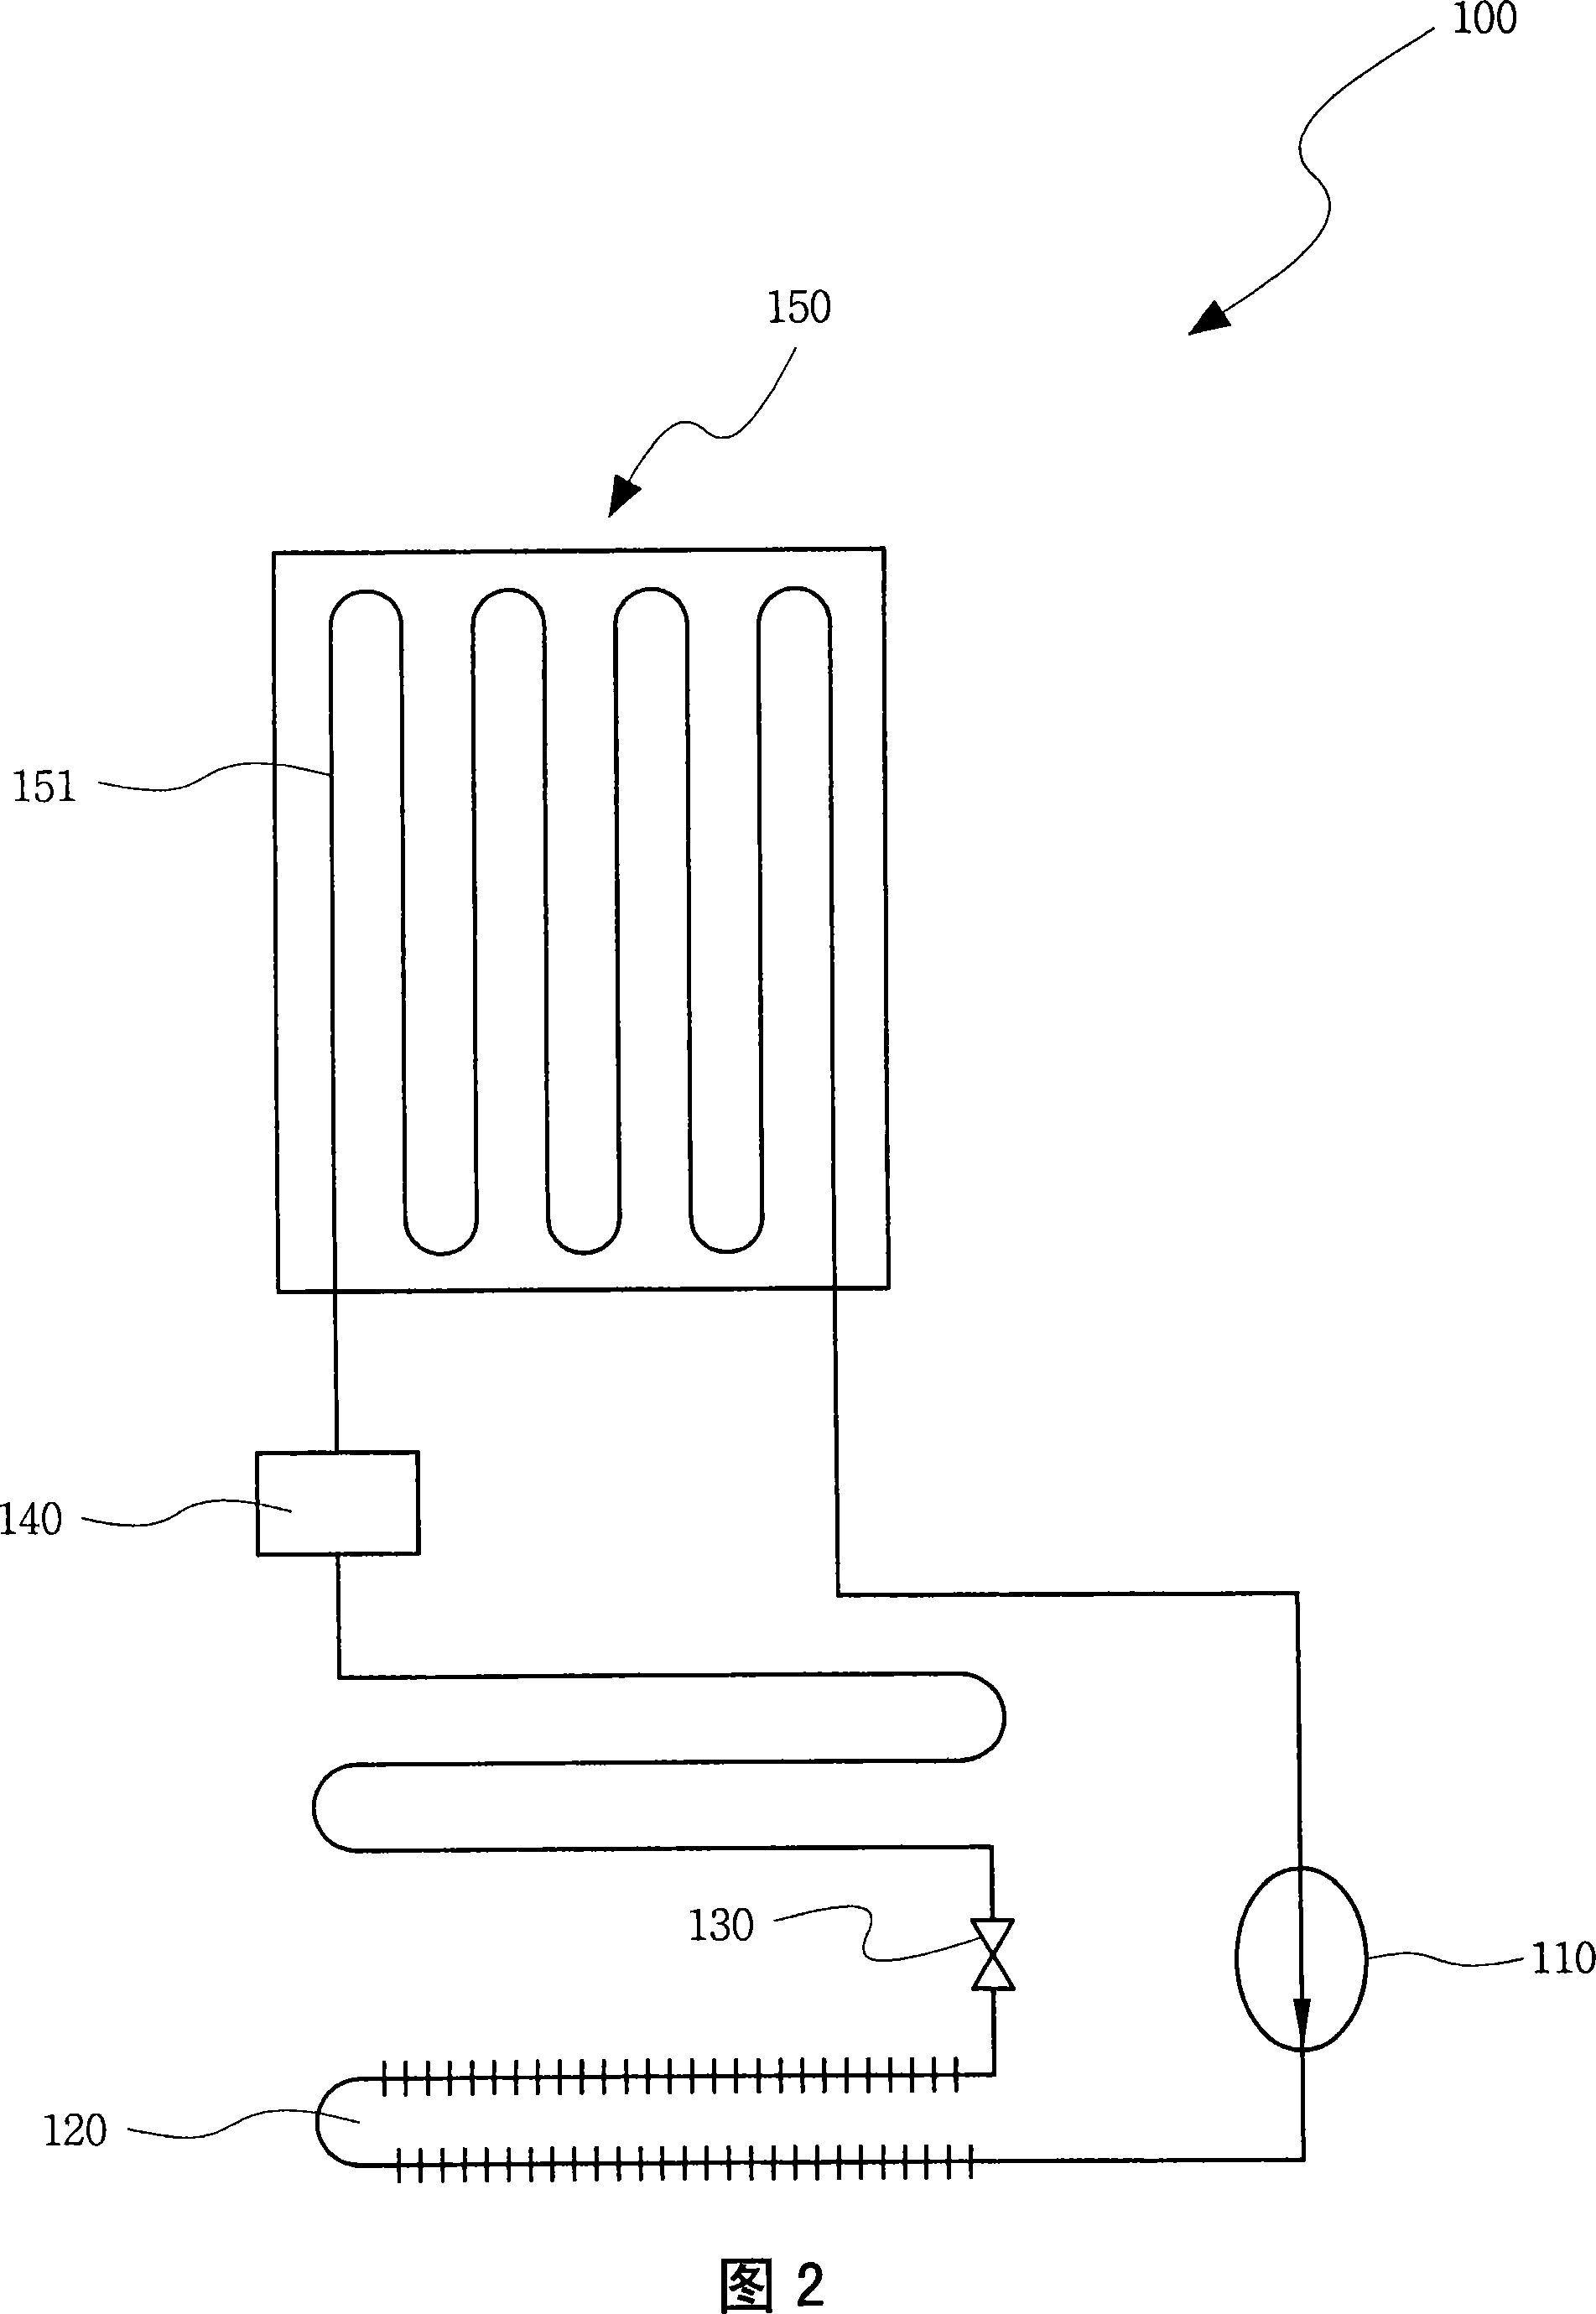 Partial radiation cooling device